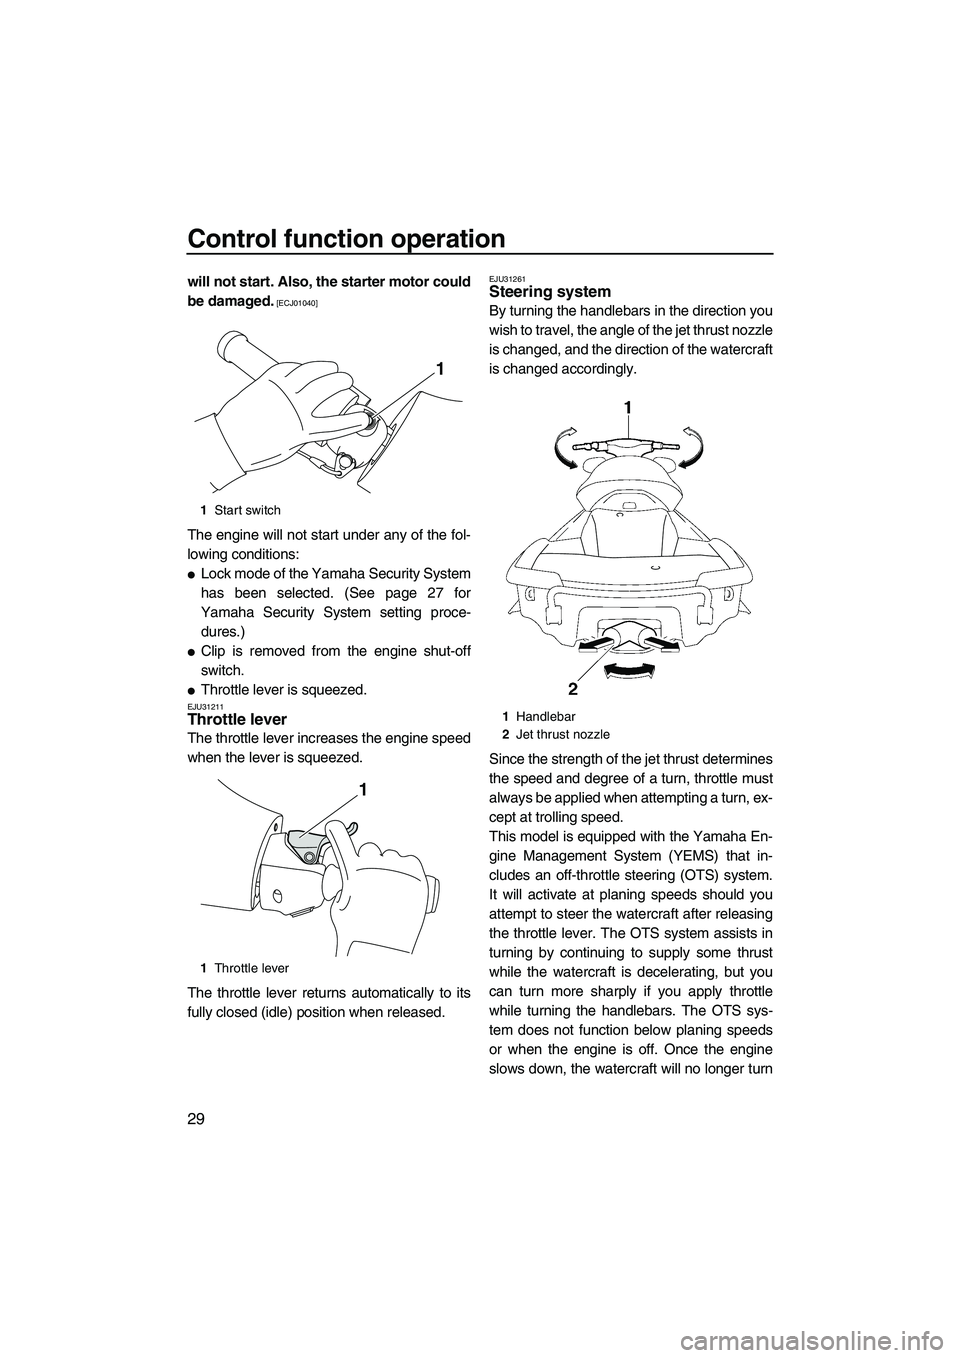 YAMAHA SVHO 2010 Owners Guide Control function operation
29
will not start. Also, the starter motor could
be damaged.
 [ECJ01040]
The engine will not start under any of the fol-
lowing conditions:
Lock mode of the Yamaha Security